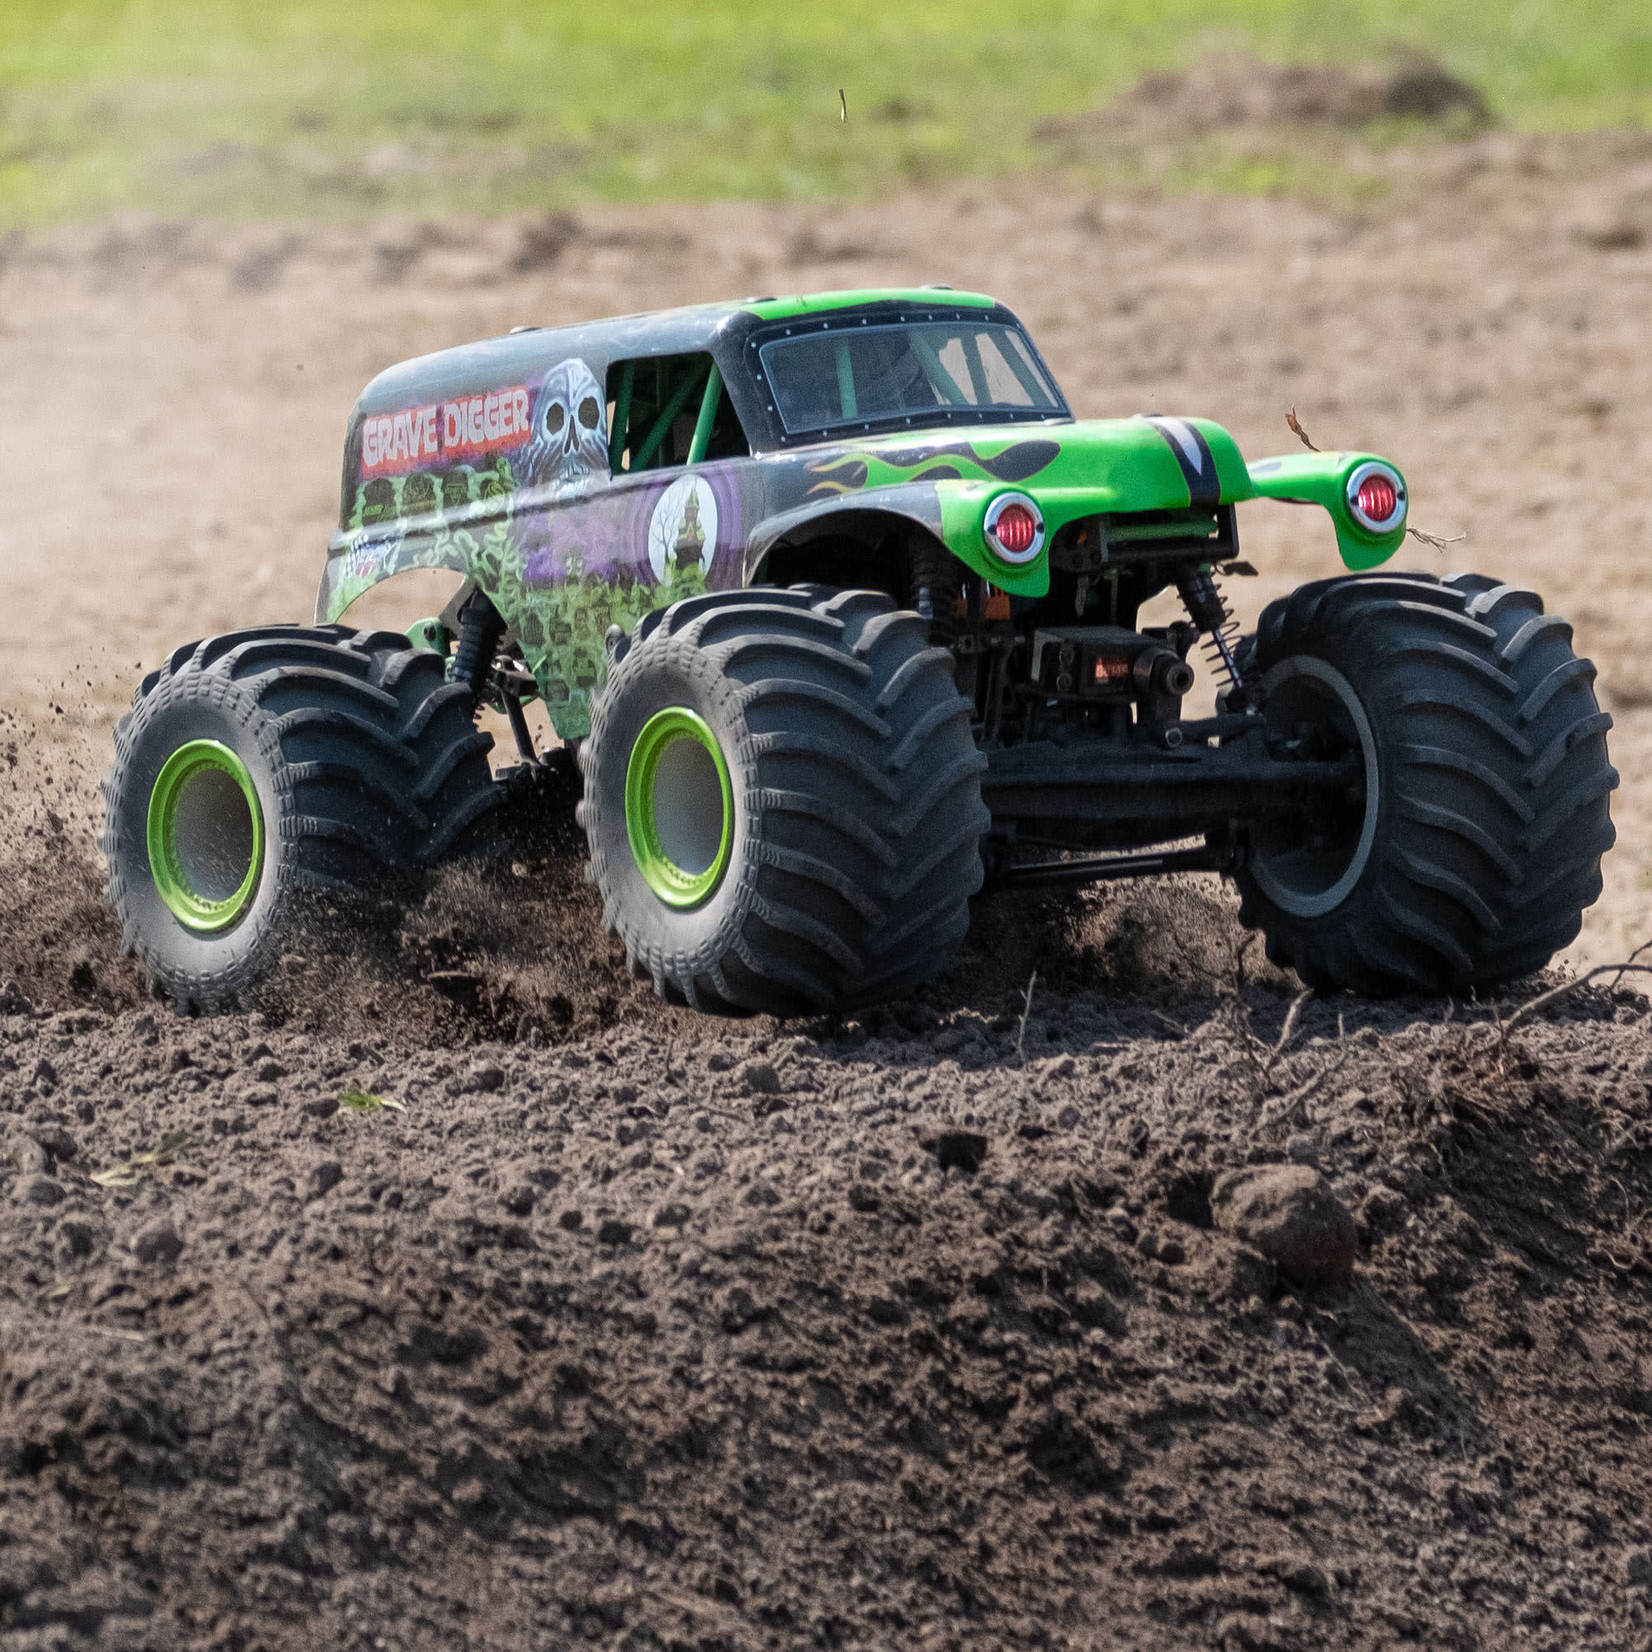 Team Losi LMT: 4wd Solid Axle Monster Truck, Grave Digger: RTR